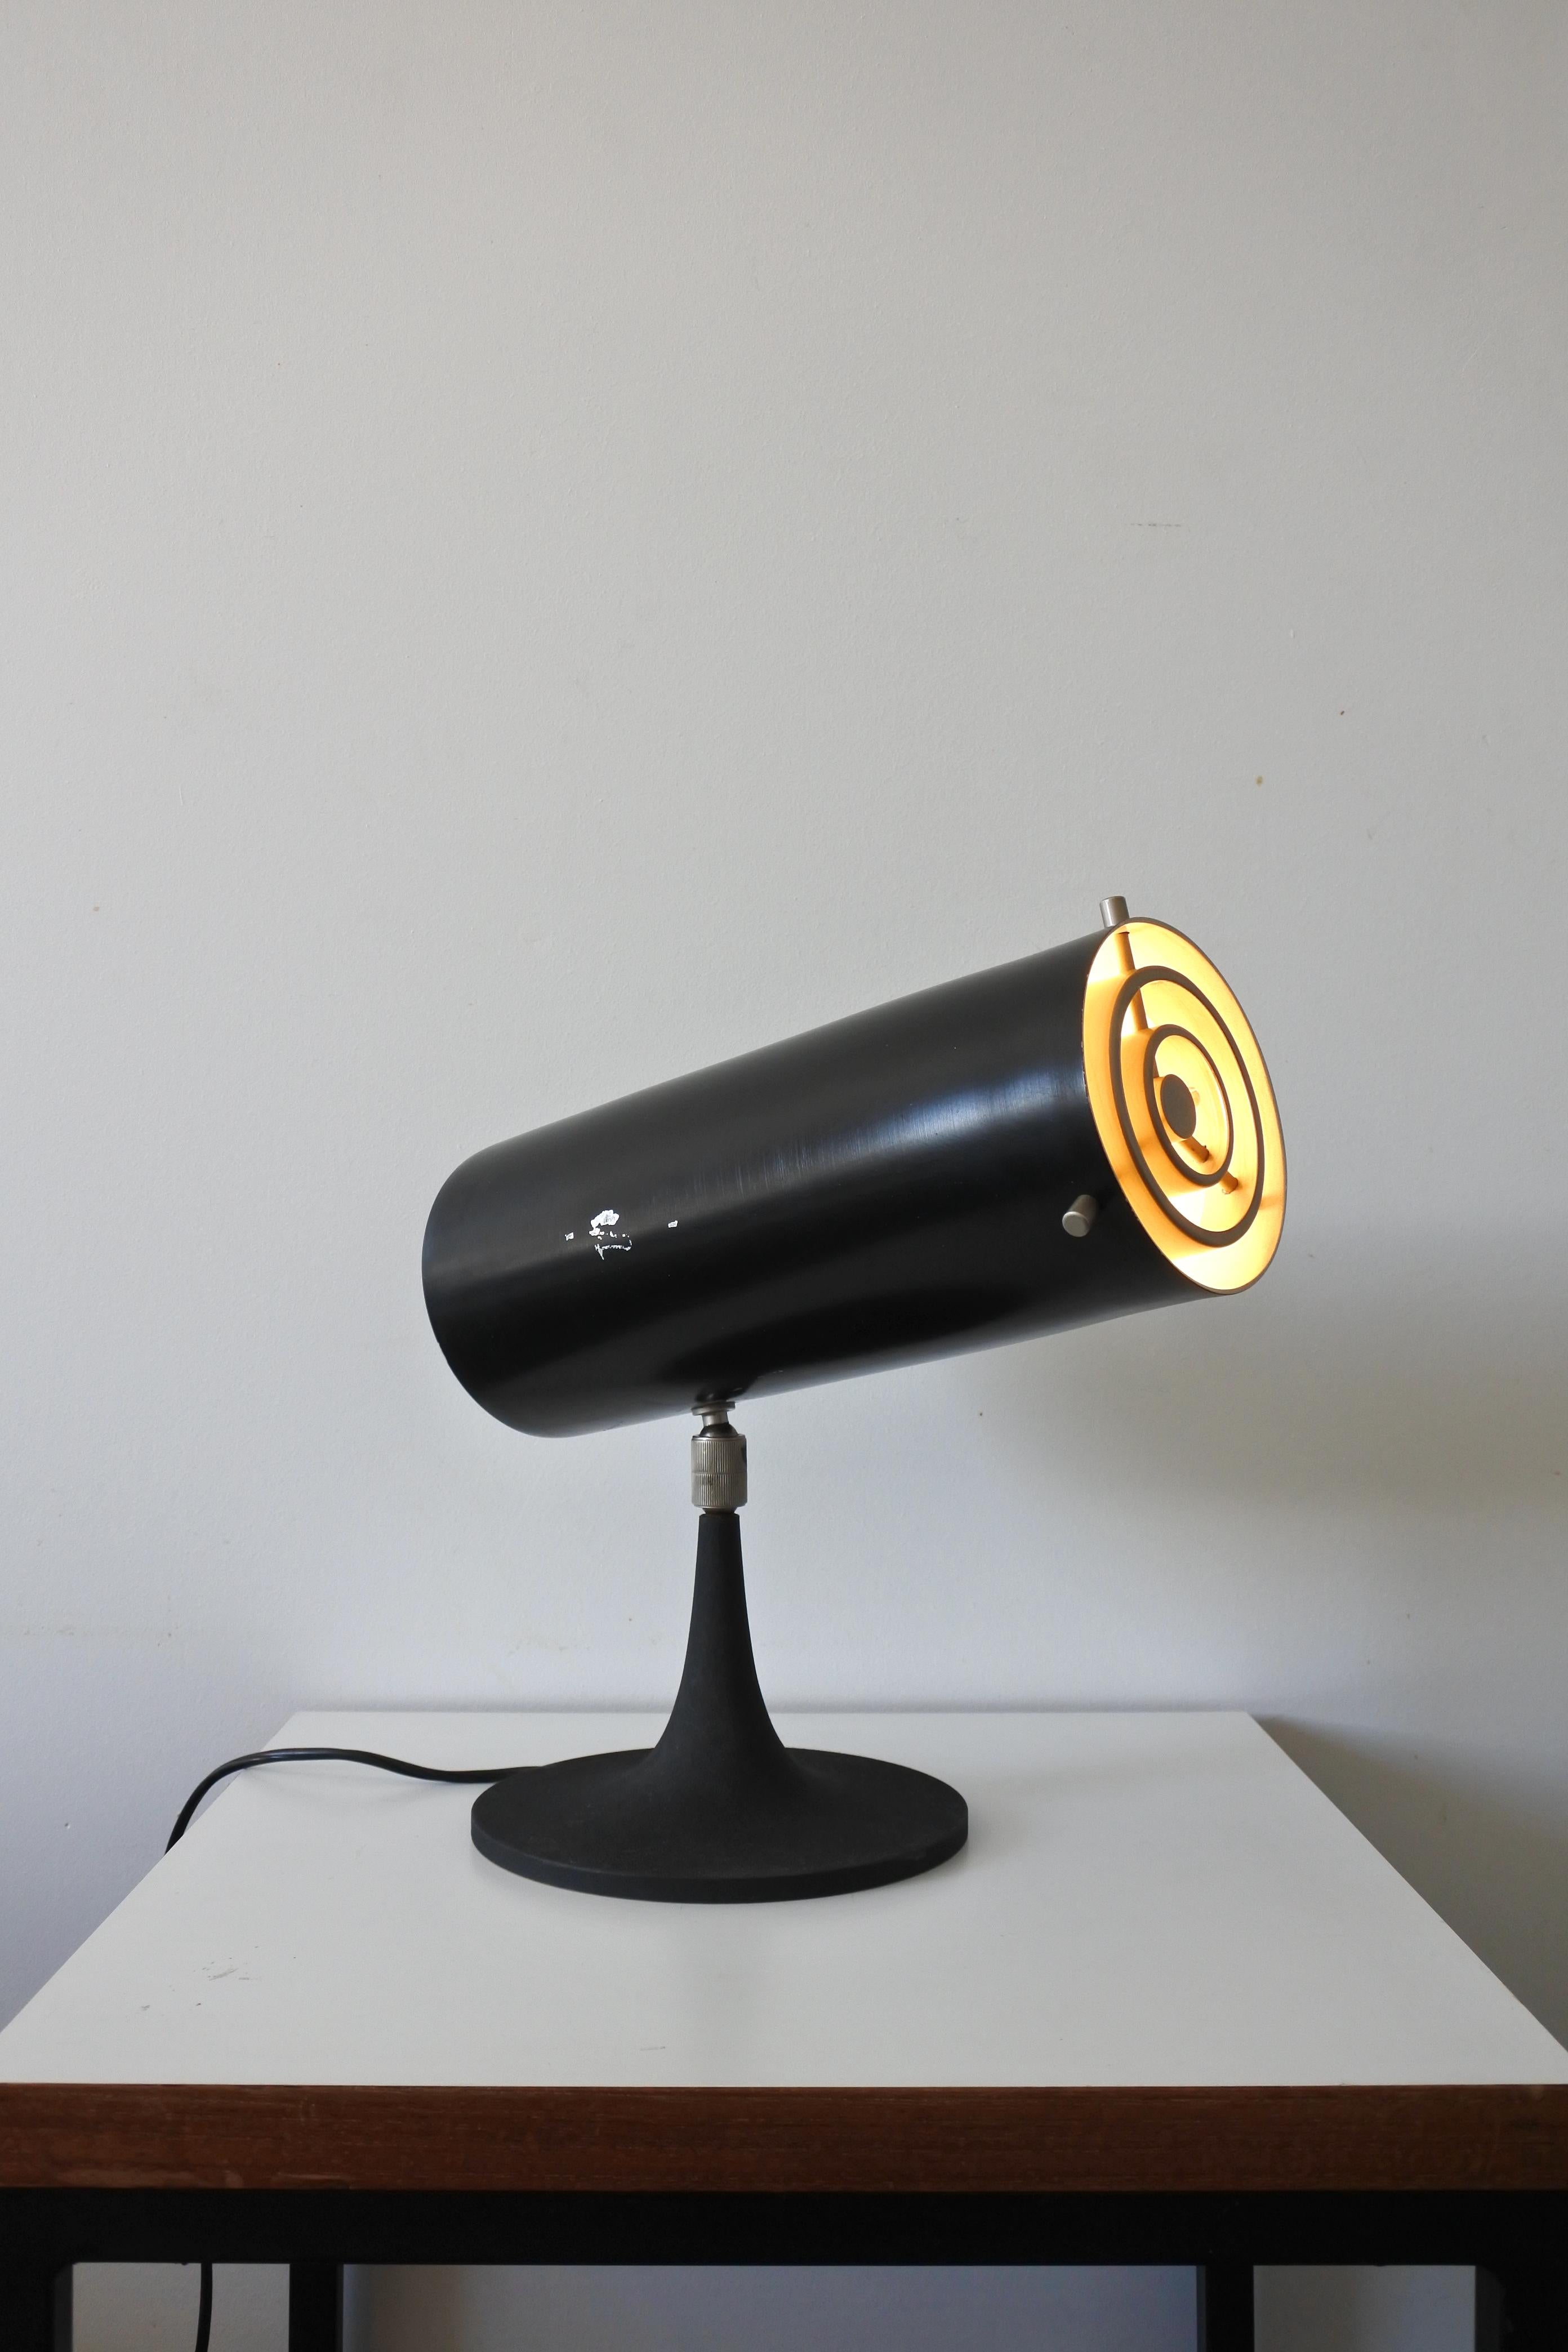 Table lamp model 569 N by Gino Sarfatti & Arteluce
Designed in 1956 and made in Italy.

Adjustable reflector in aluminium lacquered black, cast iron trumpet-shaped base lacquered in black crackle, gun-powder plated brass joint, louver and